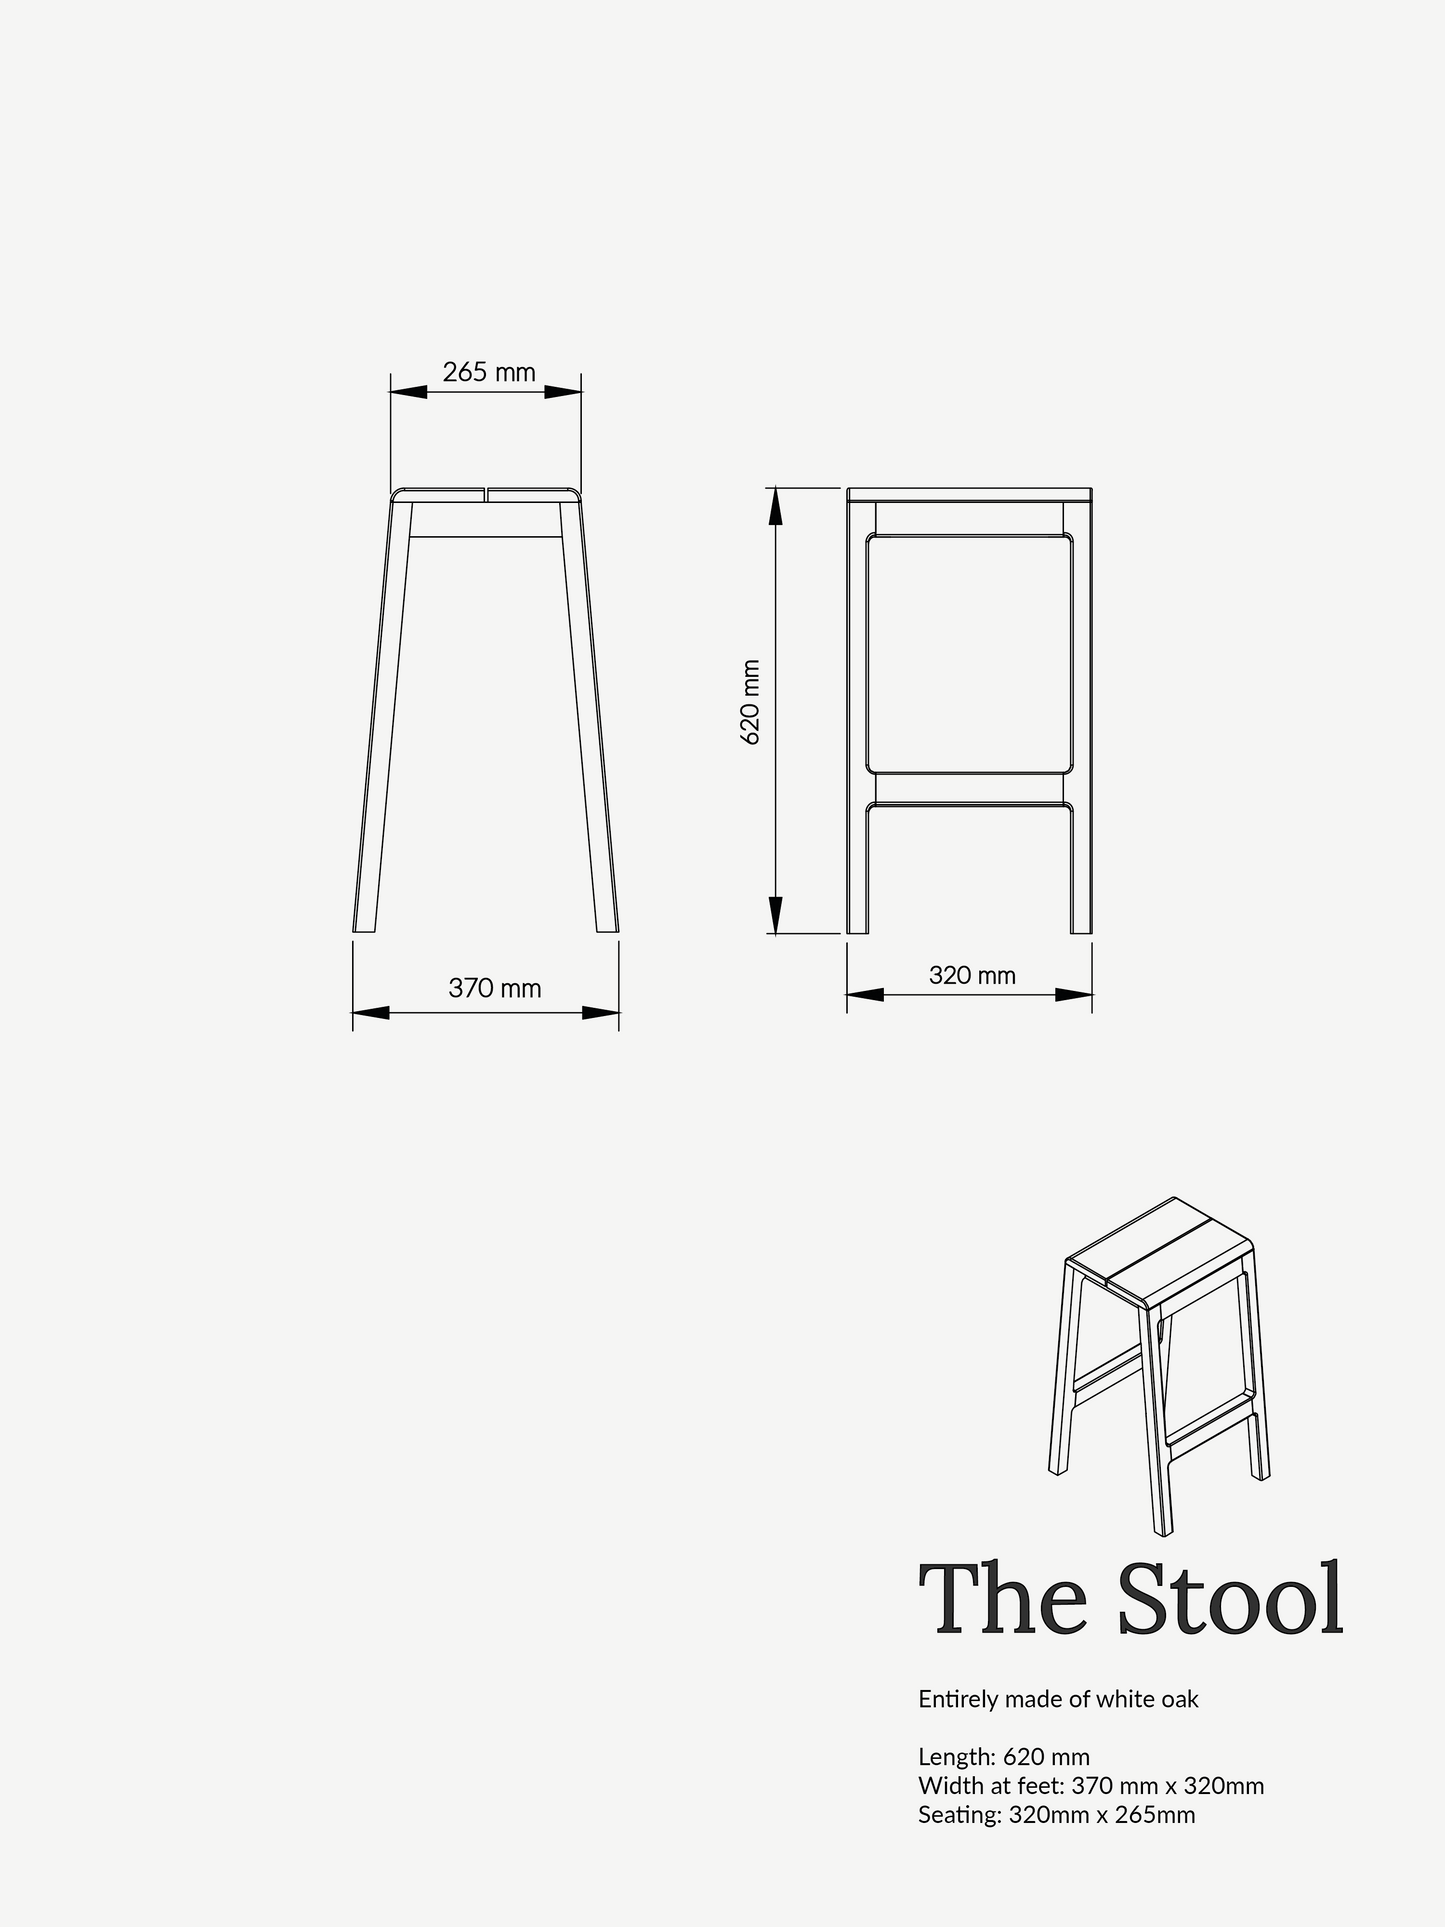 The stool